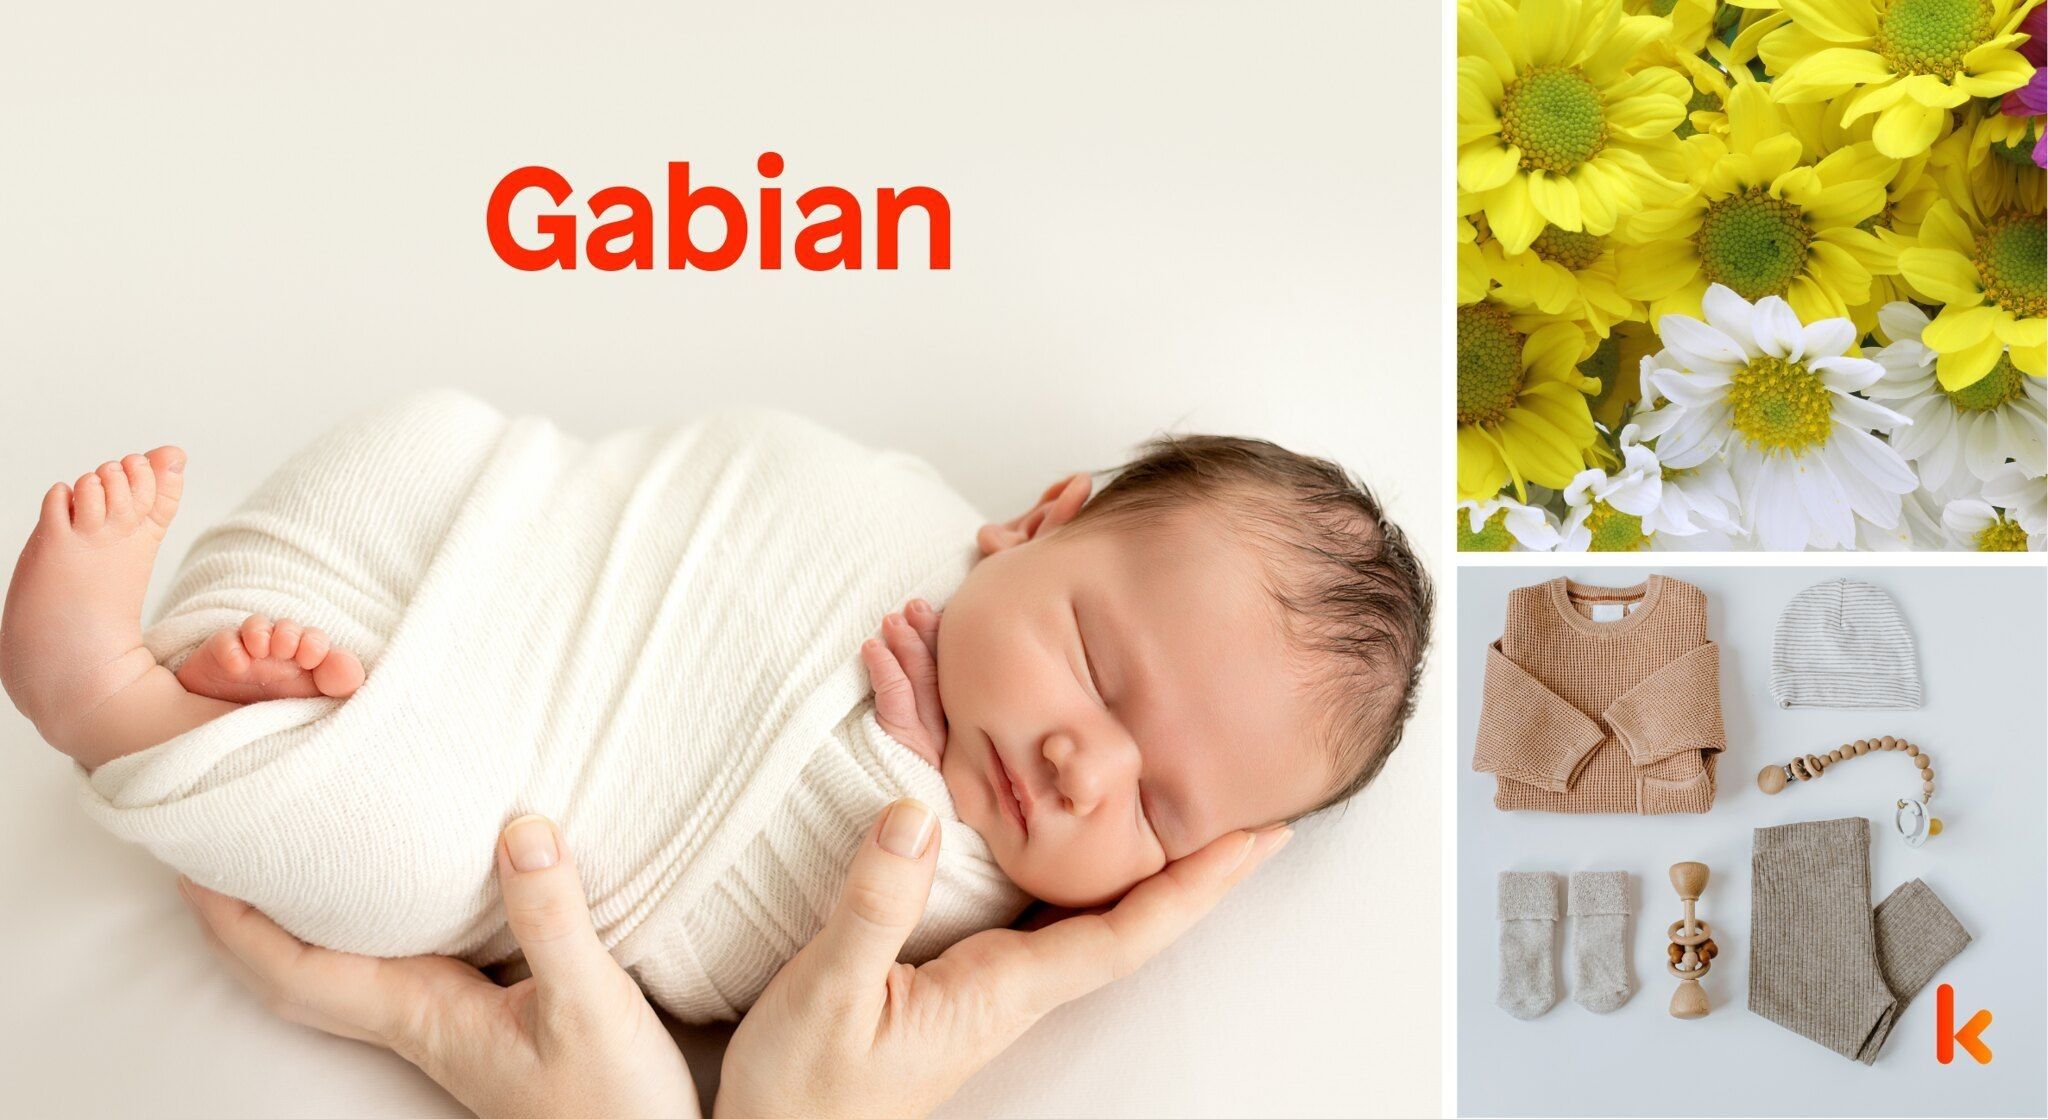 Meaning of the name Gabian